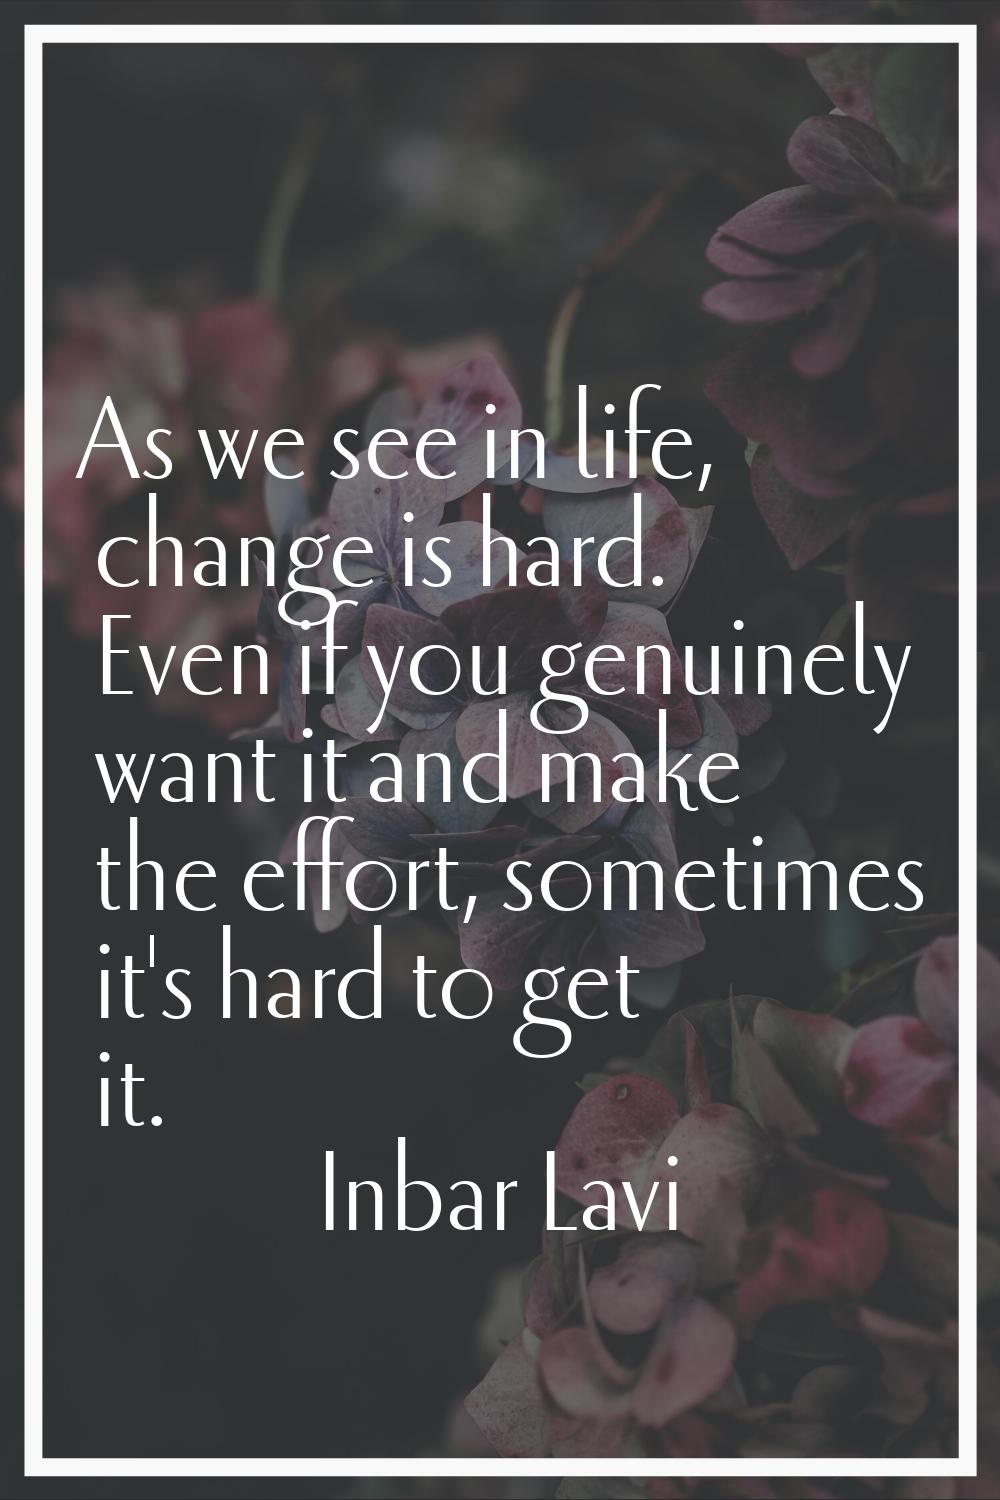 As we see in life, change is hard. Even if you genuinely want it and make the effort, sometimes it'